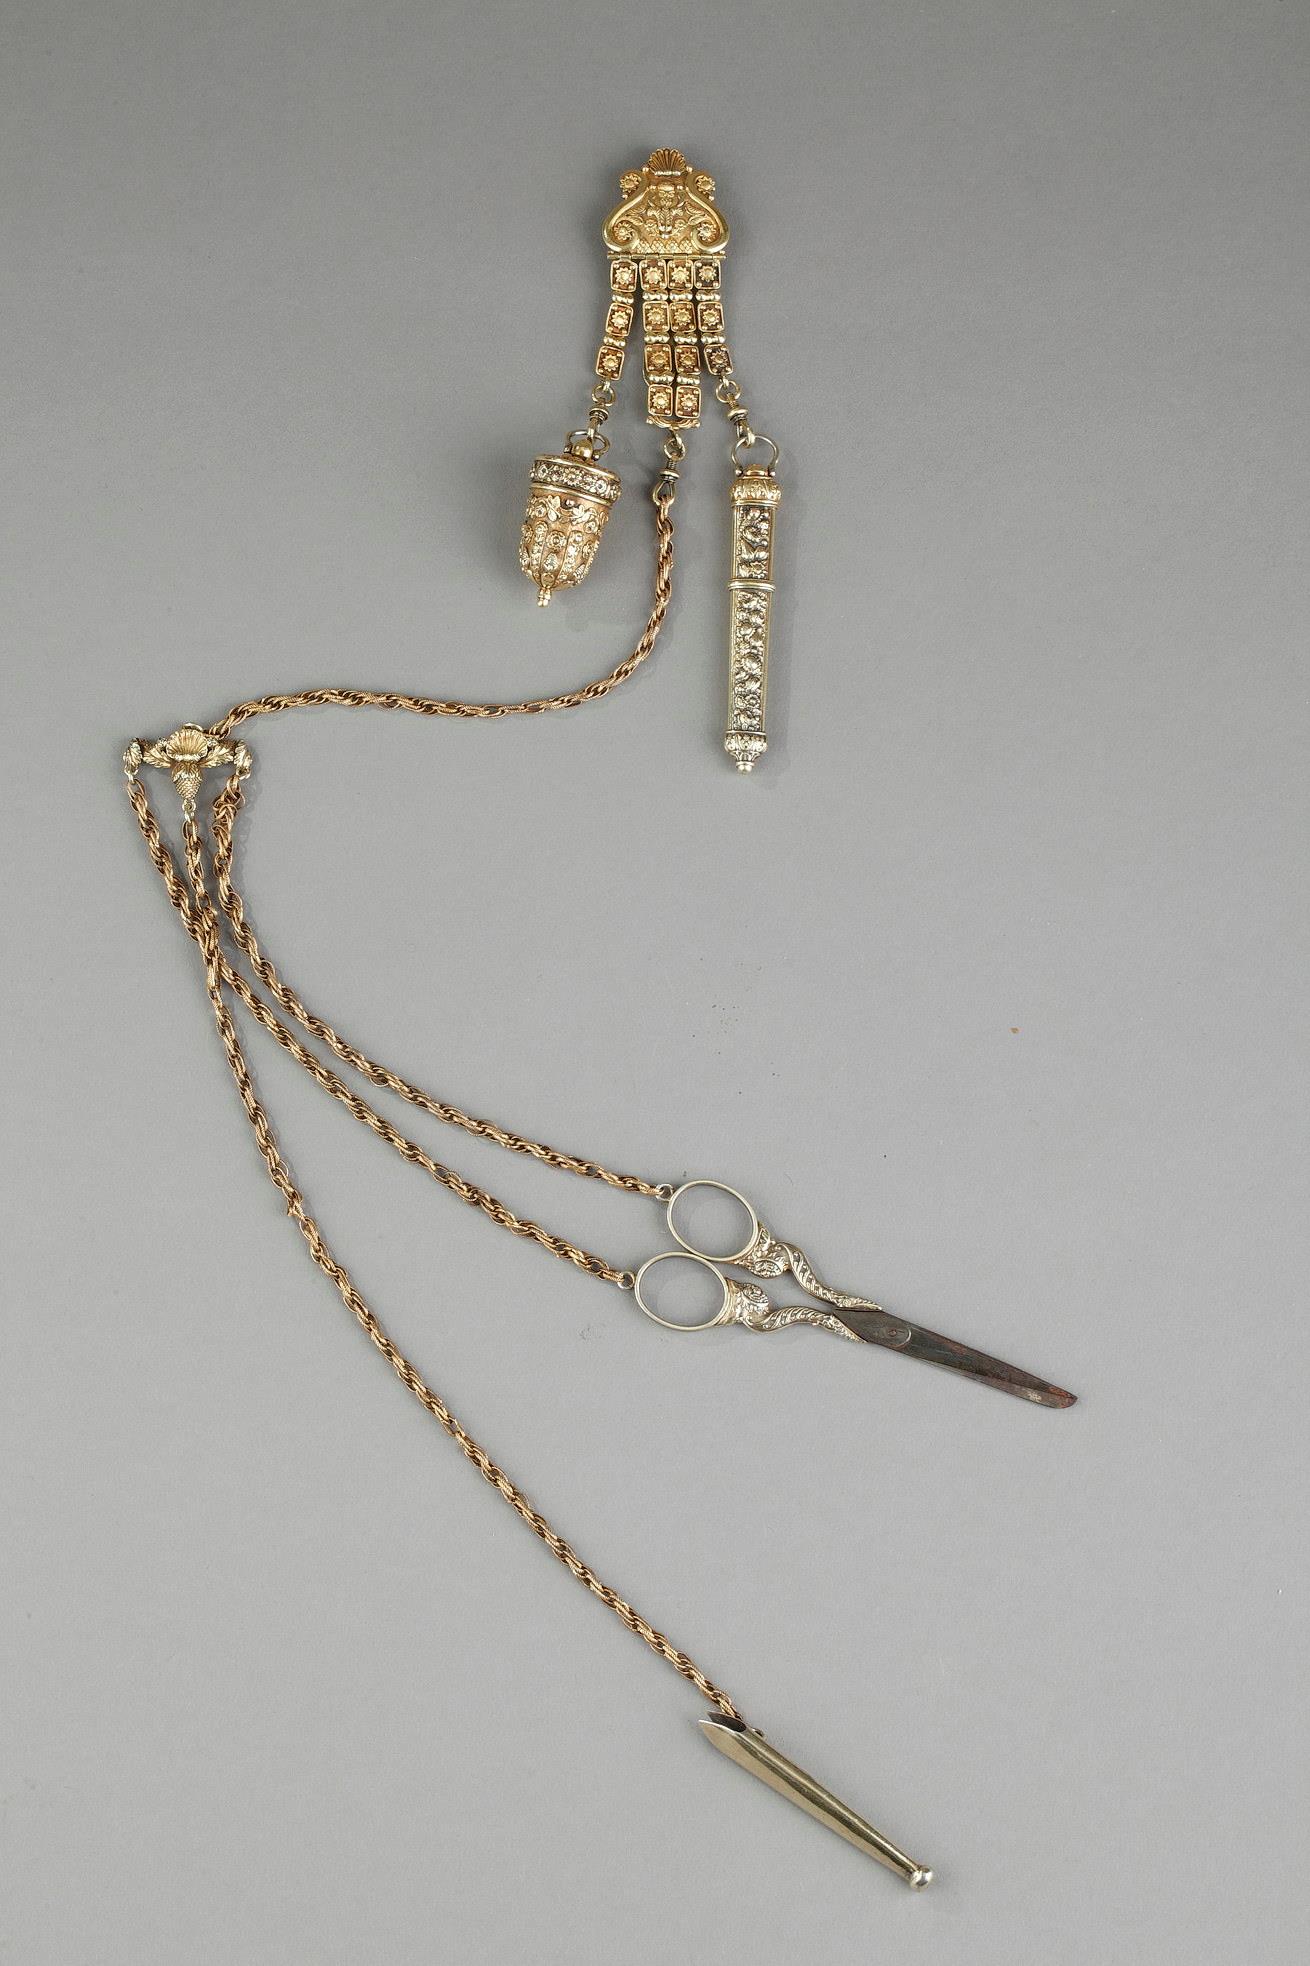 Early 19th century silver gilt chatelaine.